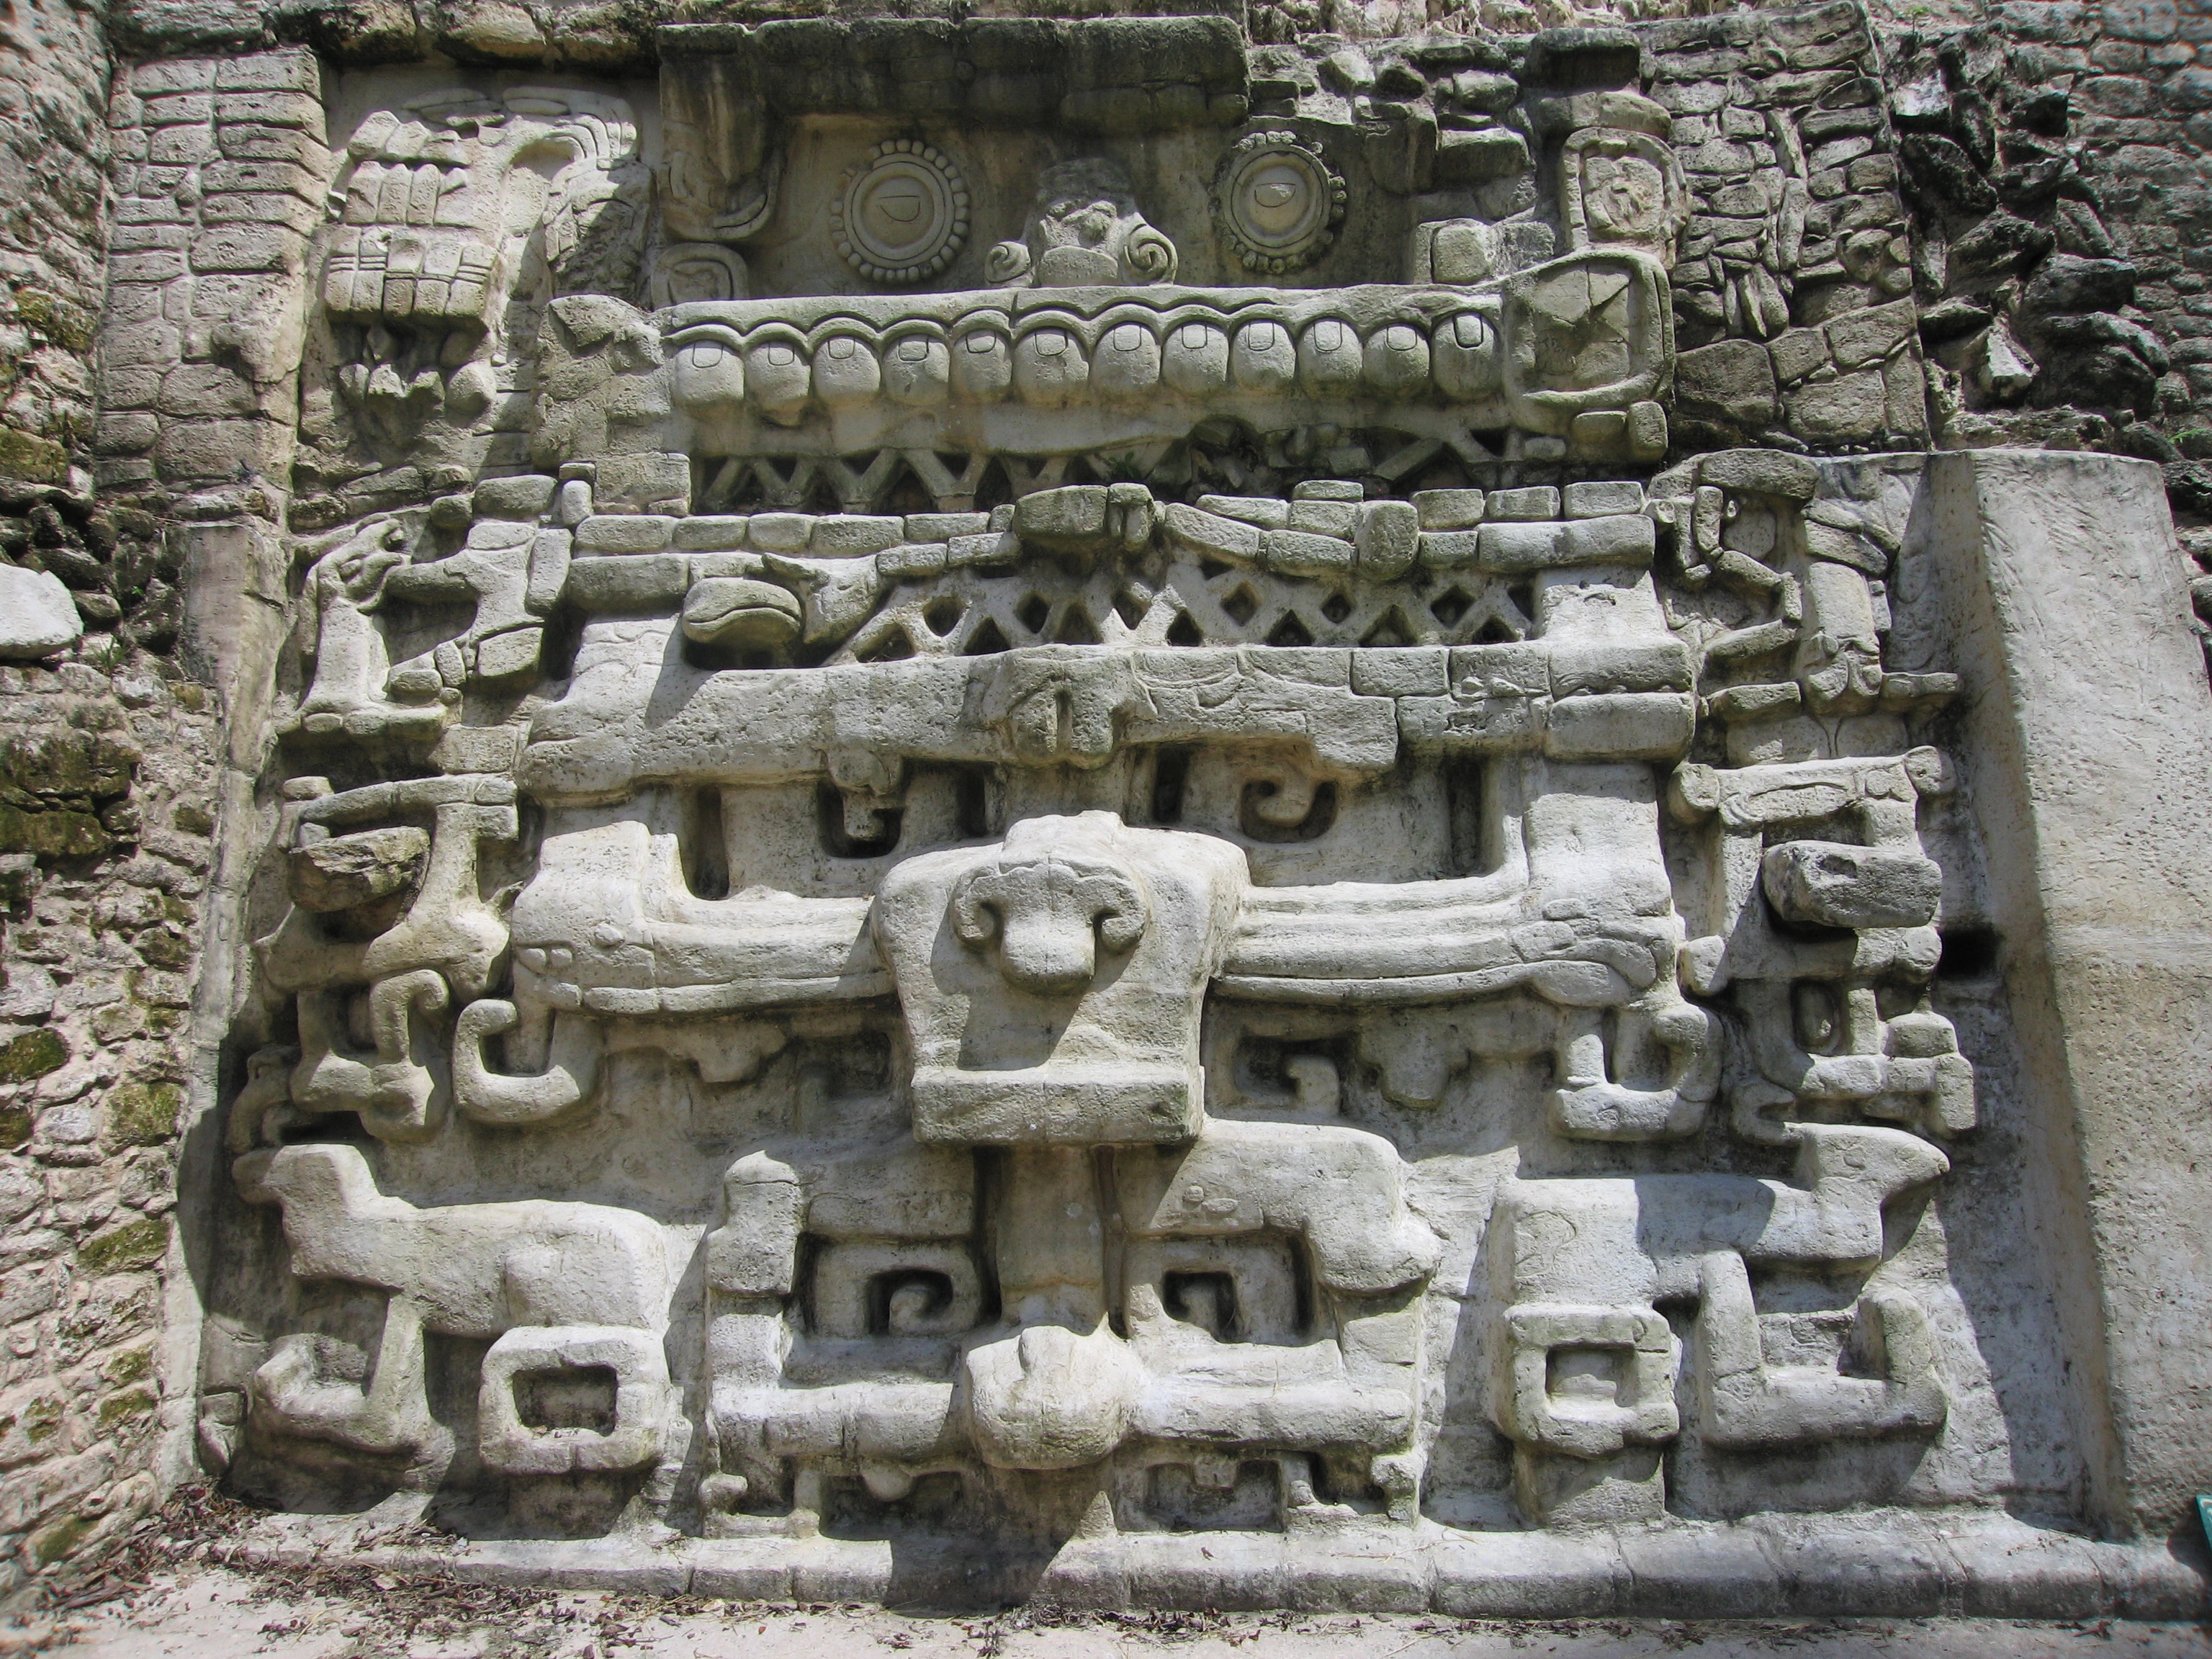 Less predictable rainfall important for Maya decline